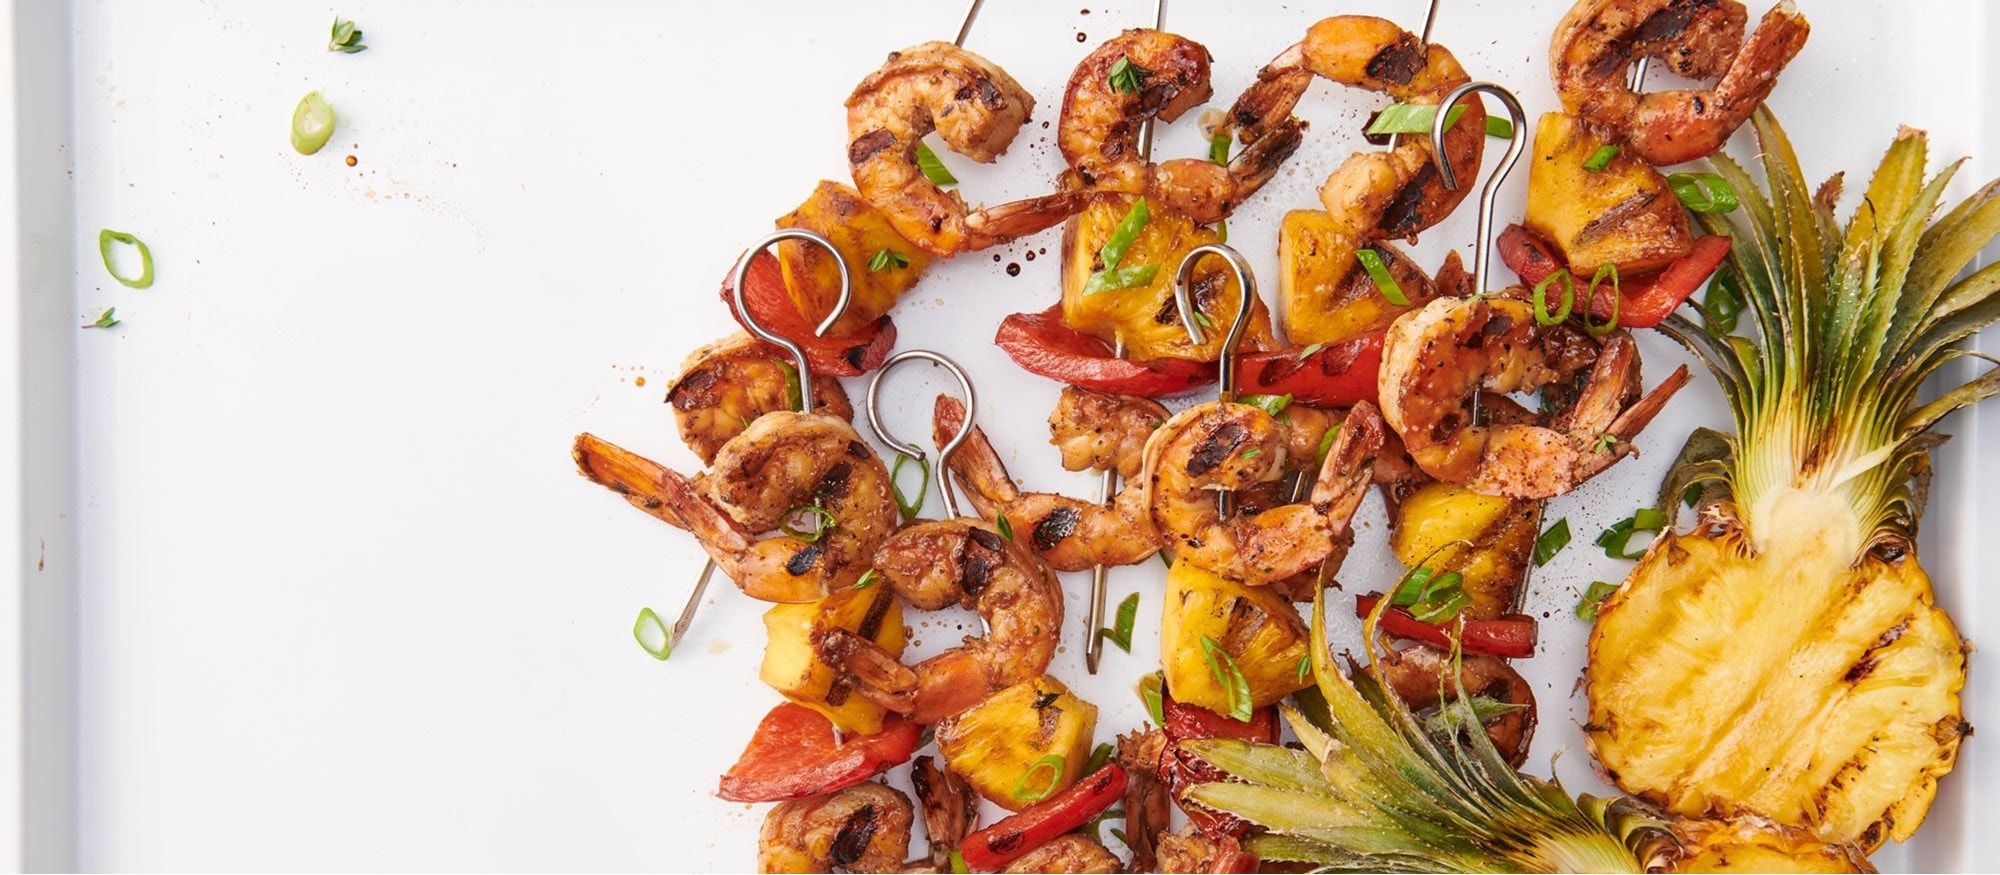 Easy and delicious Jamaican Jerk Shrimp Kebabs recipe using your Wolf Dual Fuel Range